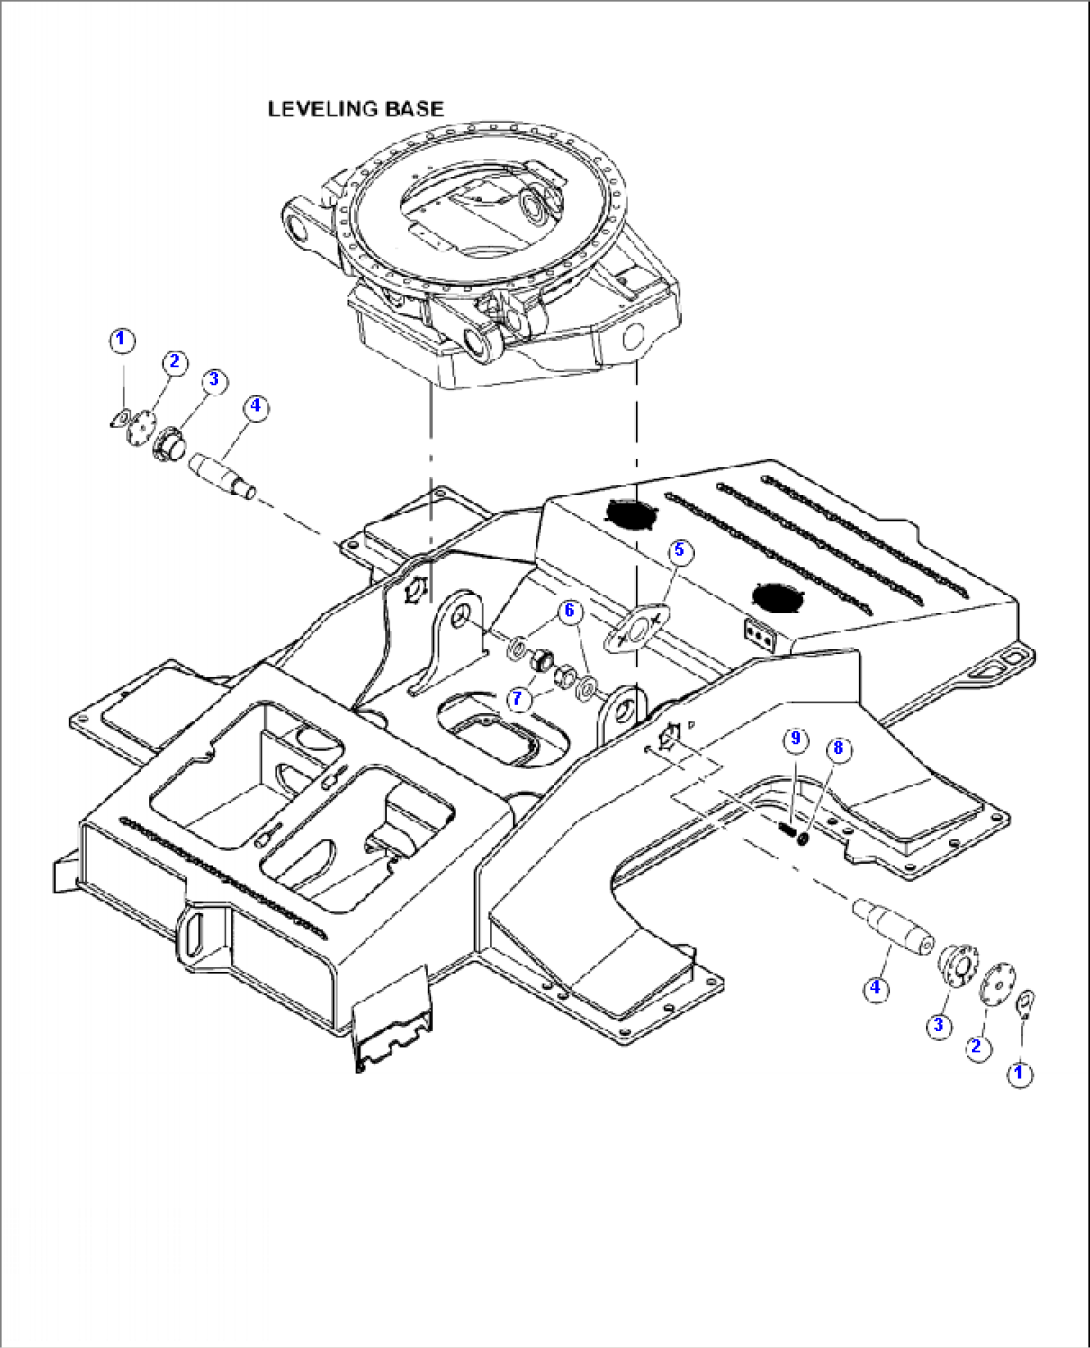 R4125-01A0 4-WAY LEVELING BASE MOUNTING